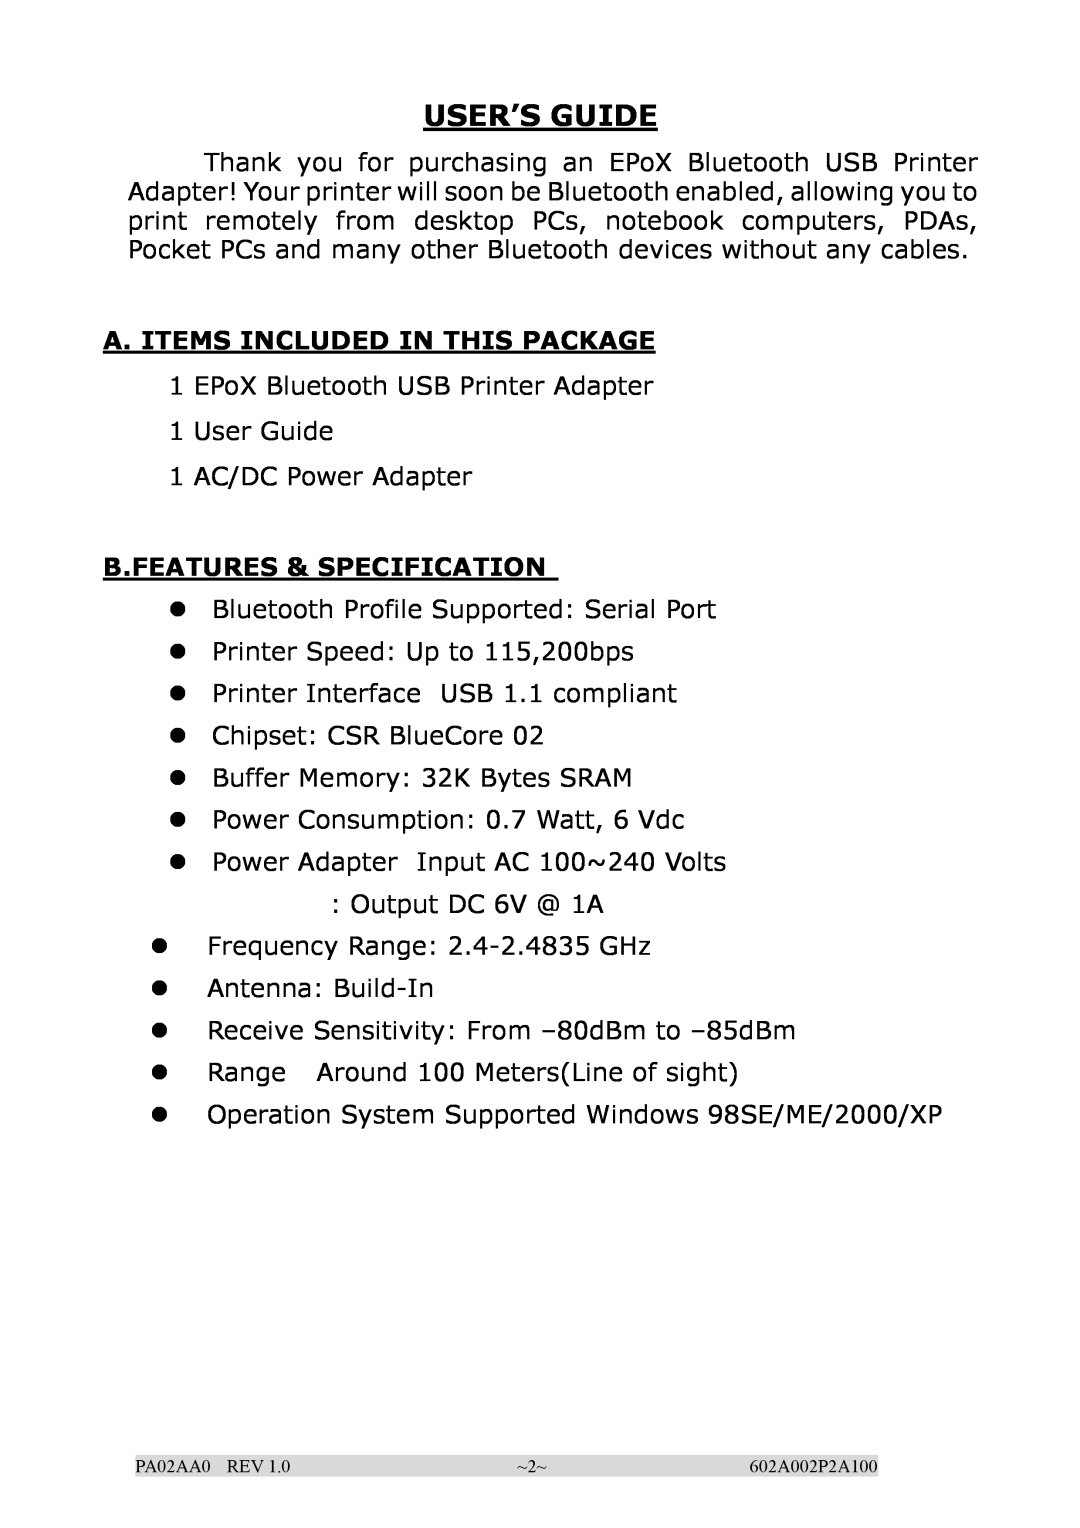 EPoX Computer BT-PA02A manual User’S Guide, A. Items Included In This Package, B.Features & Specification 